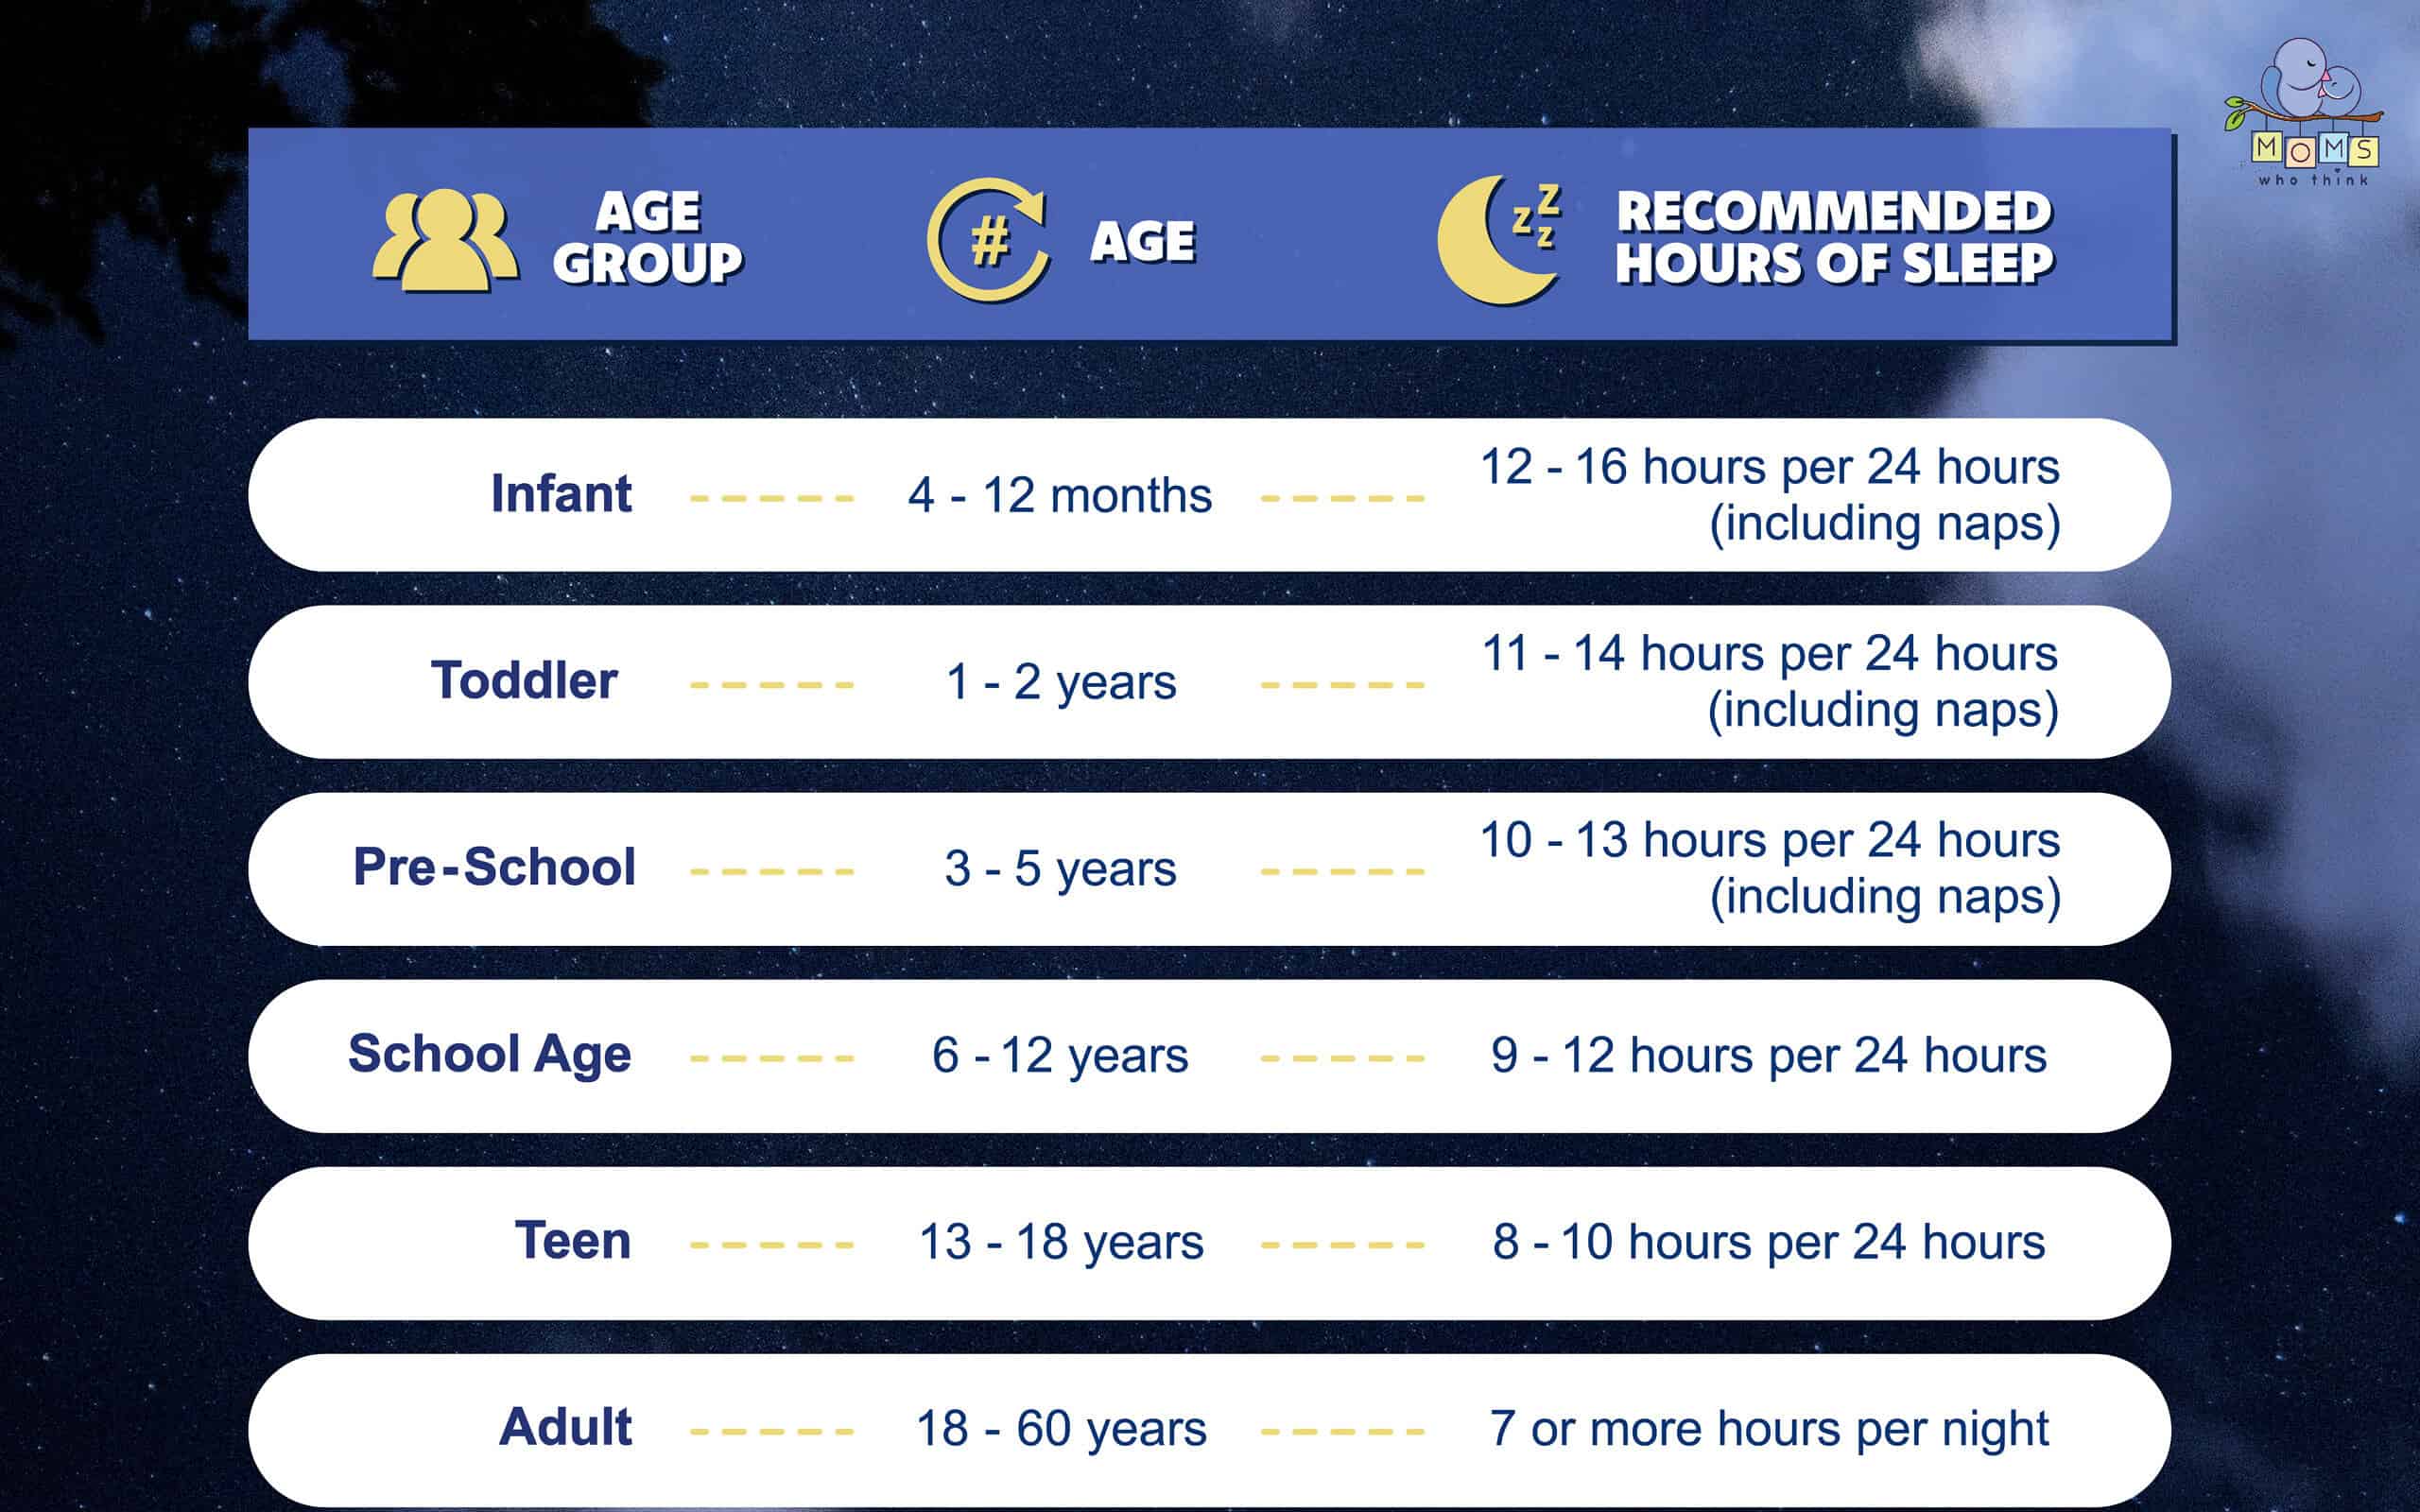 Sleep chart showing recommended amount of sleep for each age group.